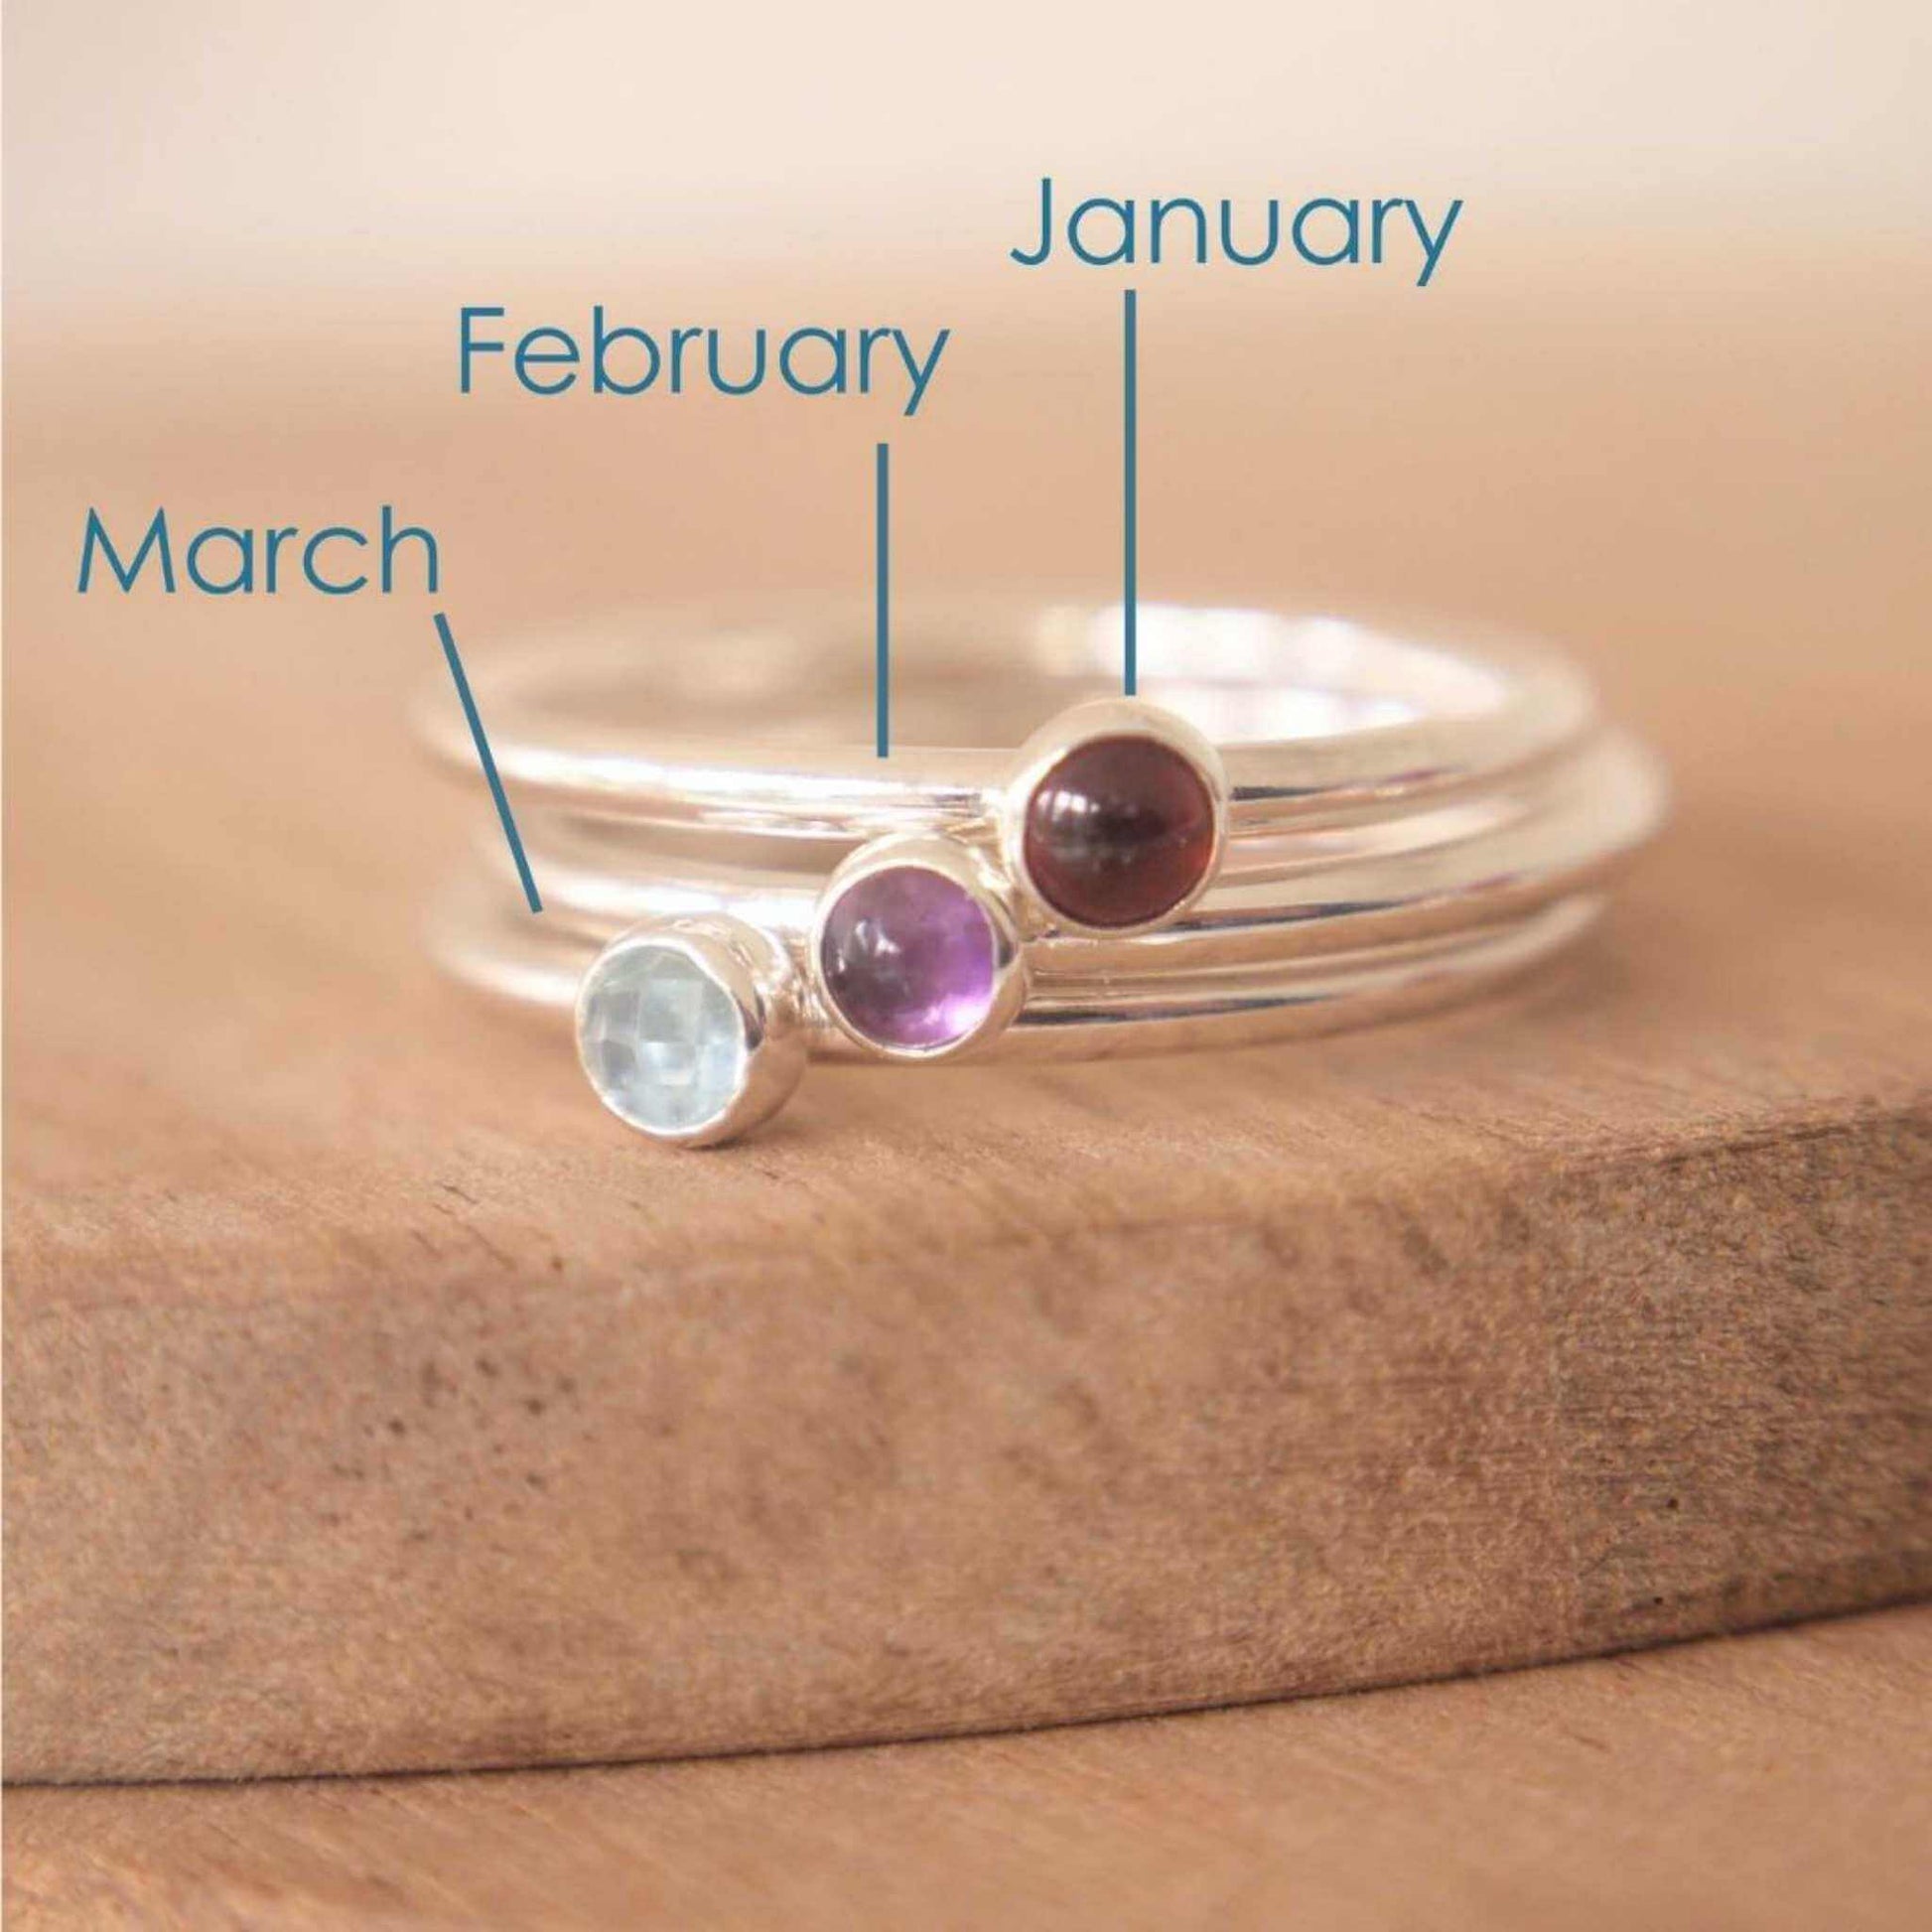 Three Silver rings, each set simply with a single gemstone in Garnet, Amethyst and Blue Topaz in a round 3mm size. Birthstones for January, February and March. Handmade in Scotland  by Maram Jewellery